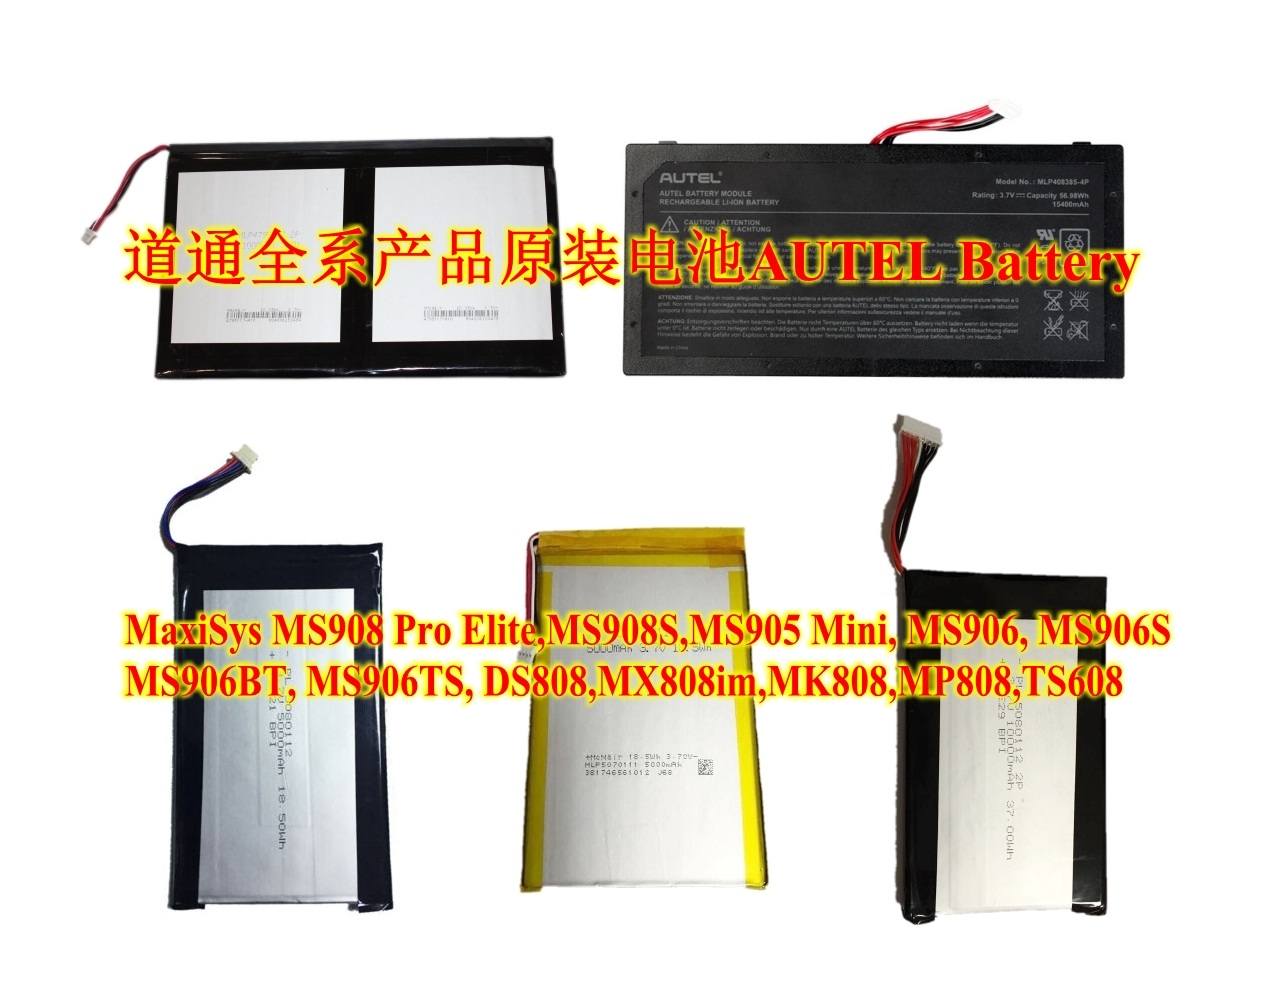 Battery for Autel Maxisys Elite MS908 MS908S PRO MS908CV MS906TS MS906BT TS608 DS808 MX808IM MK808 MP808 